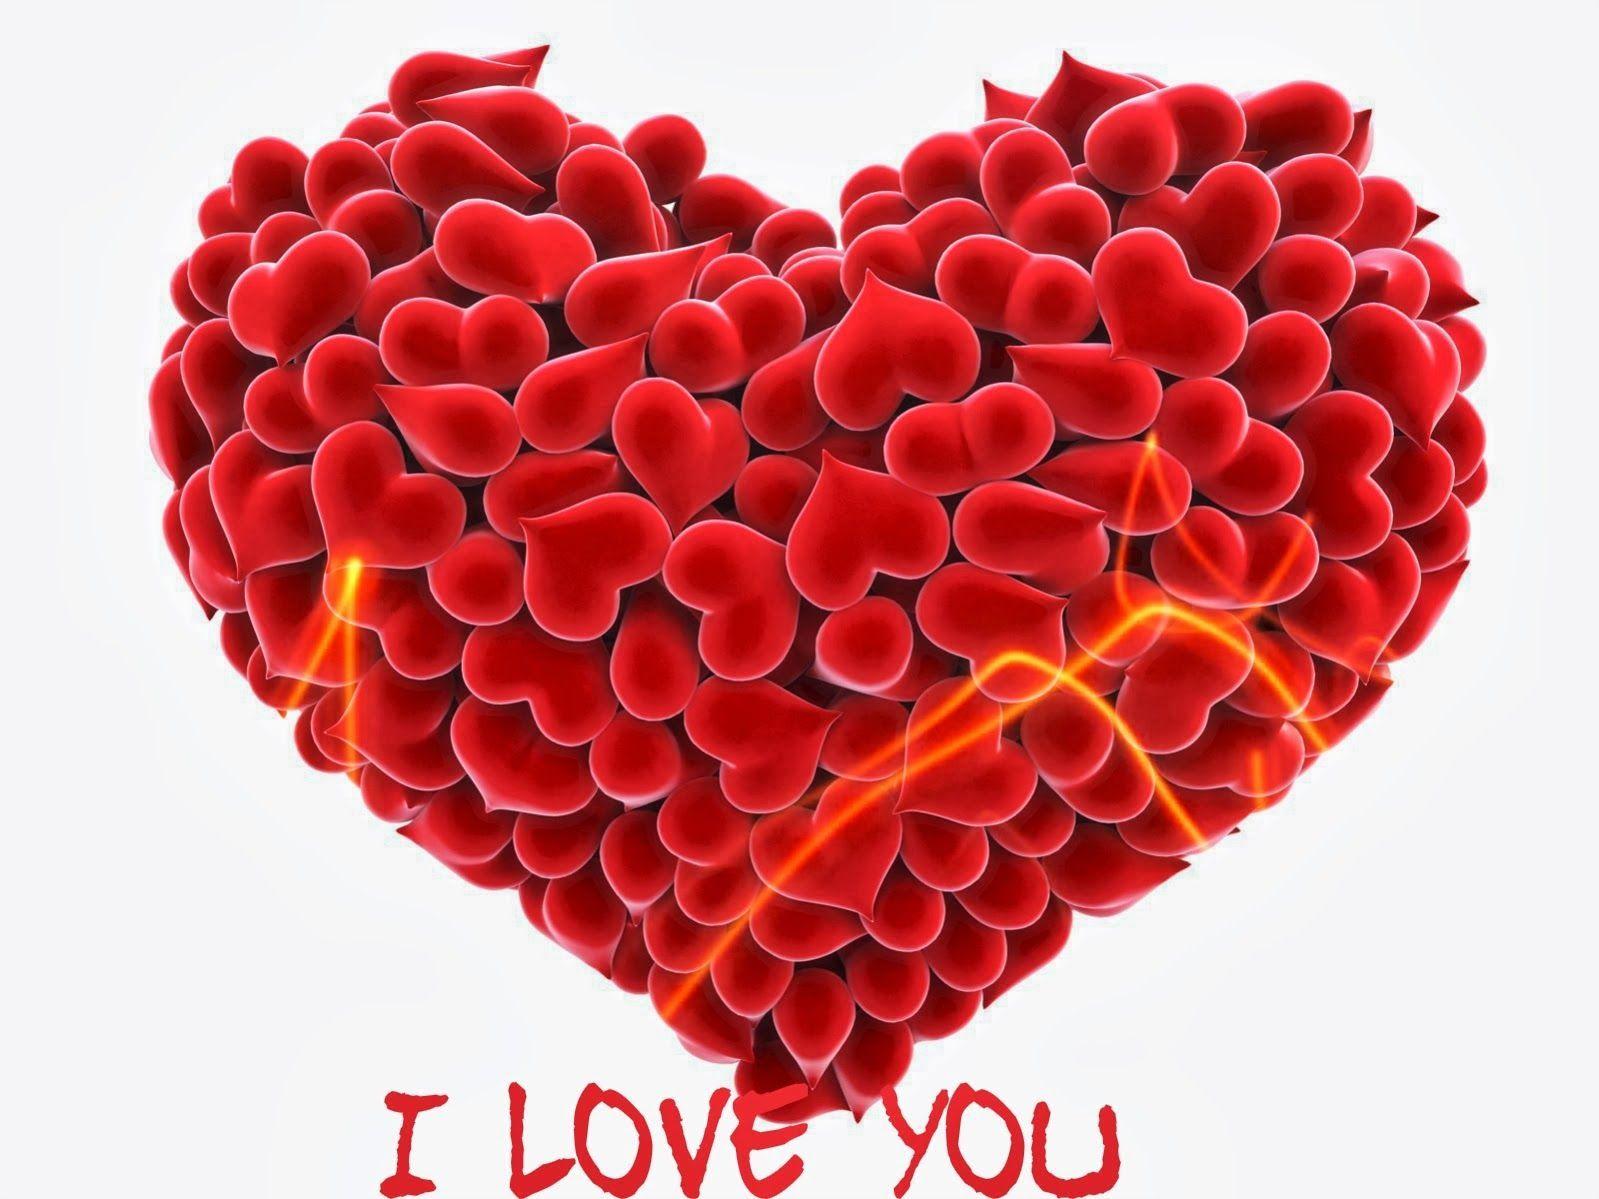 I Love You Wallpaper For Happy Valentines Day Wallpaper 2014